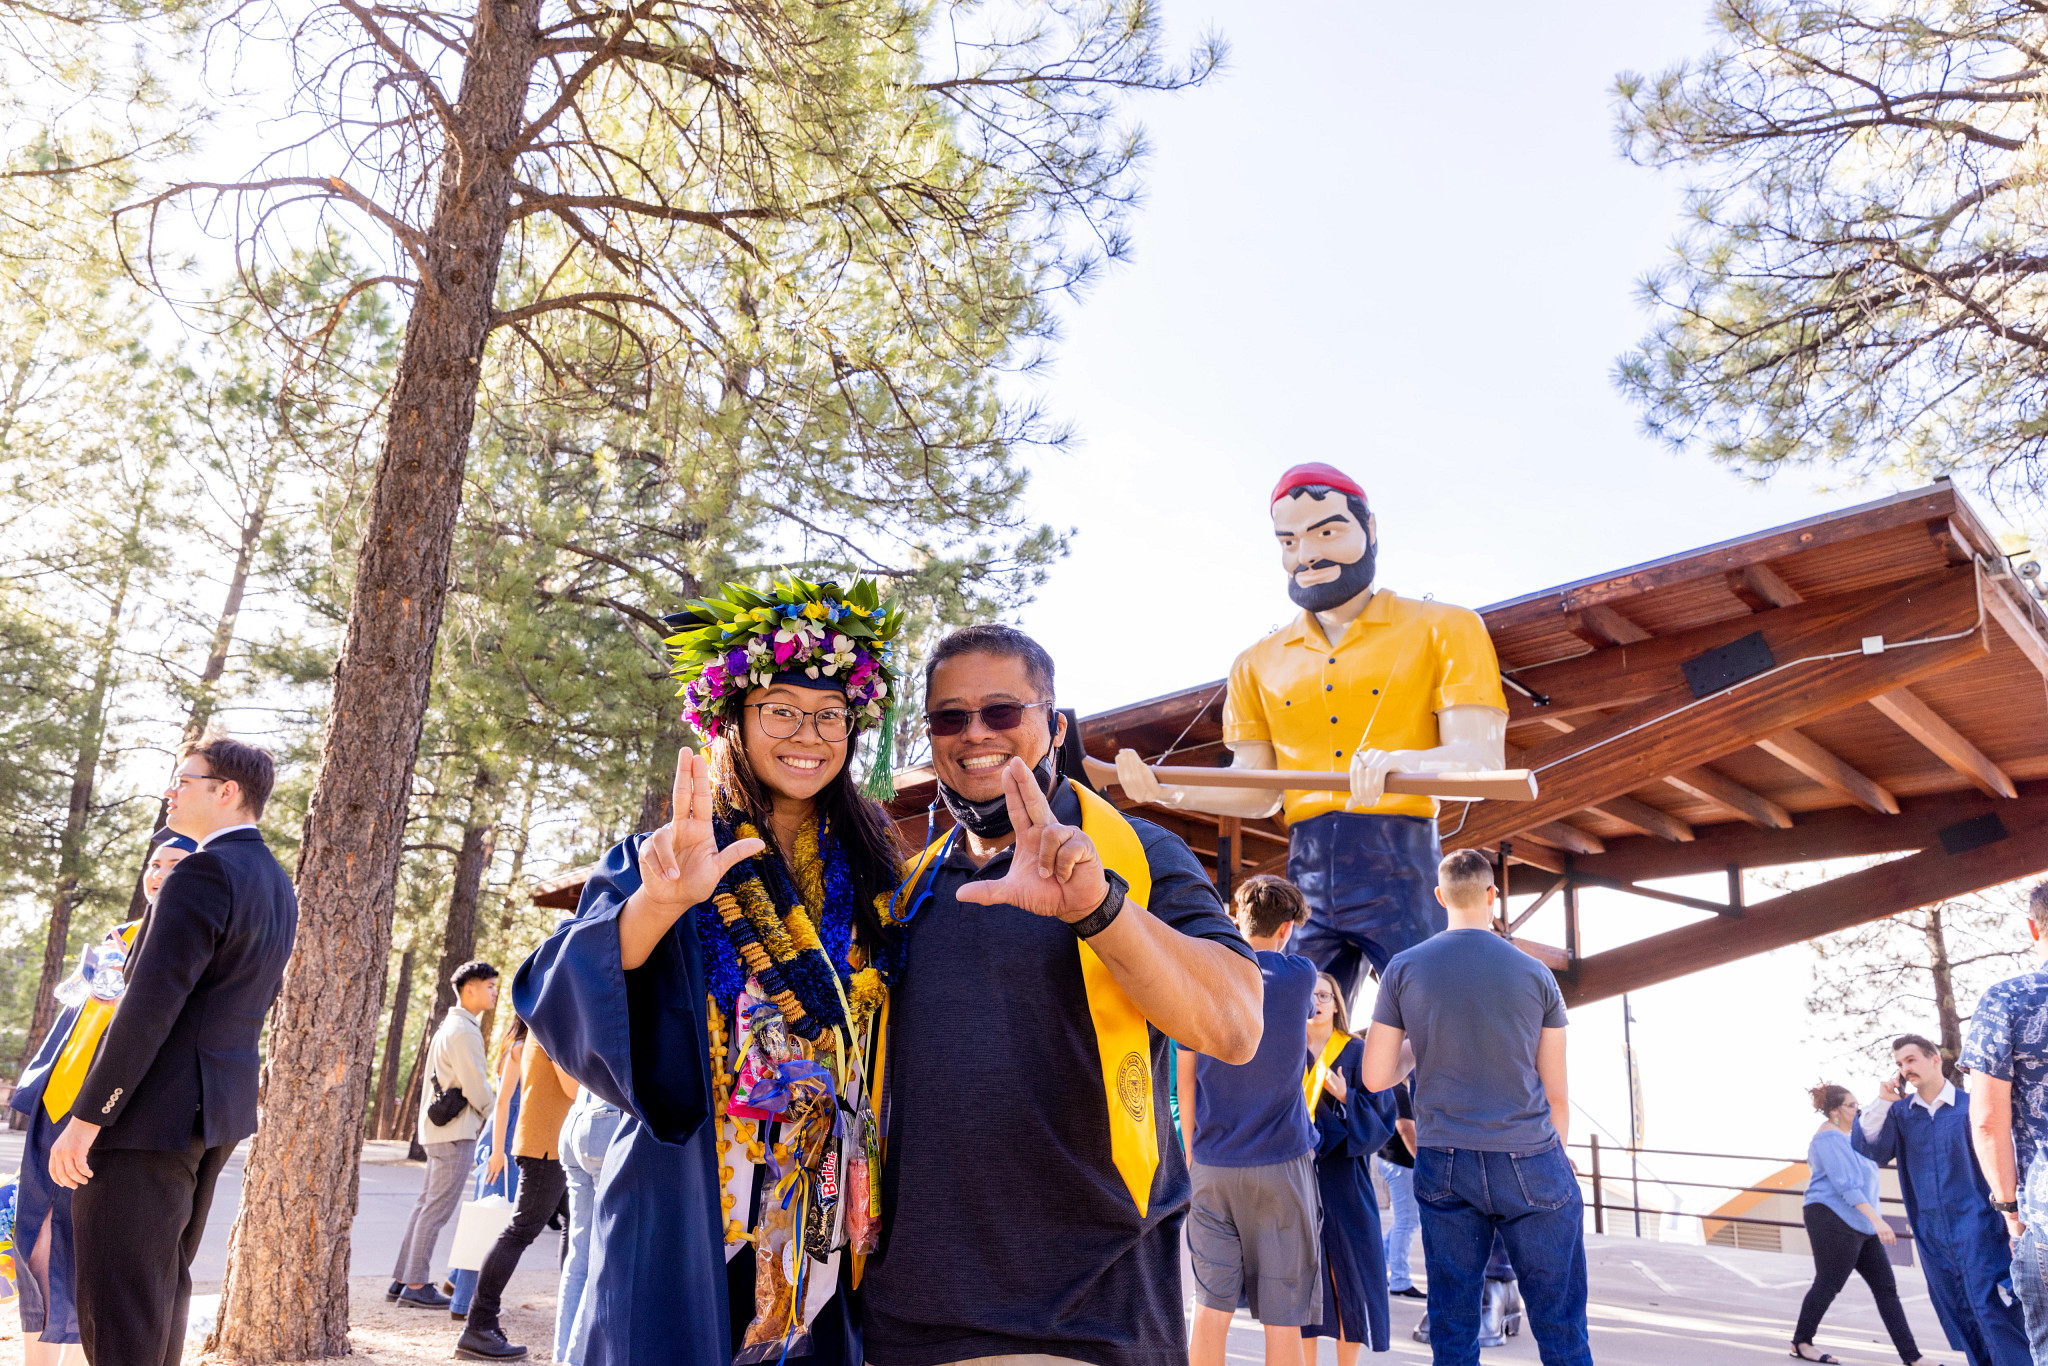 An NAU student and her dad, standing outside the Skydome in front of the Louie statue, giving the LJ sign with their hands